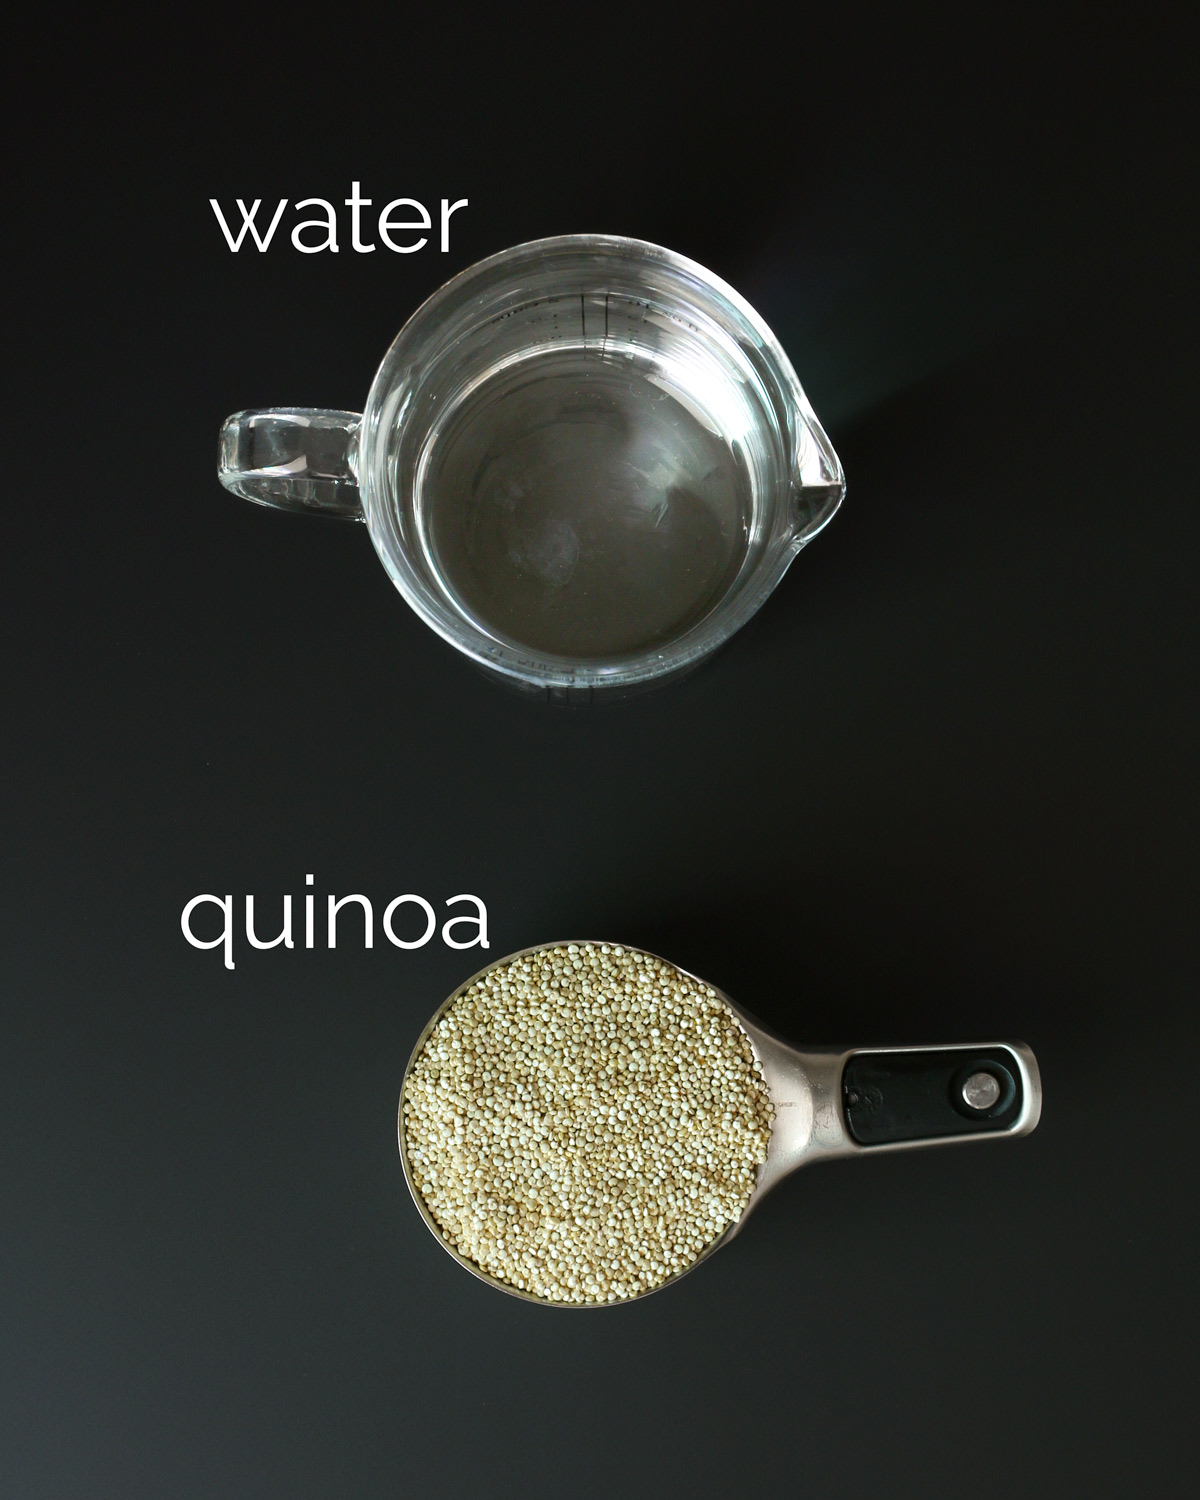 containers of quinoa and water on black table.